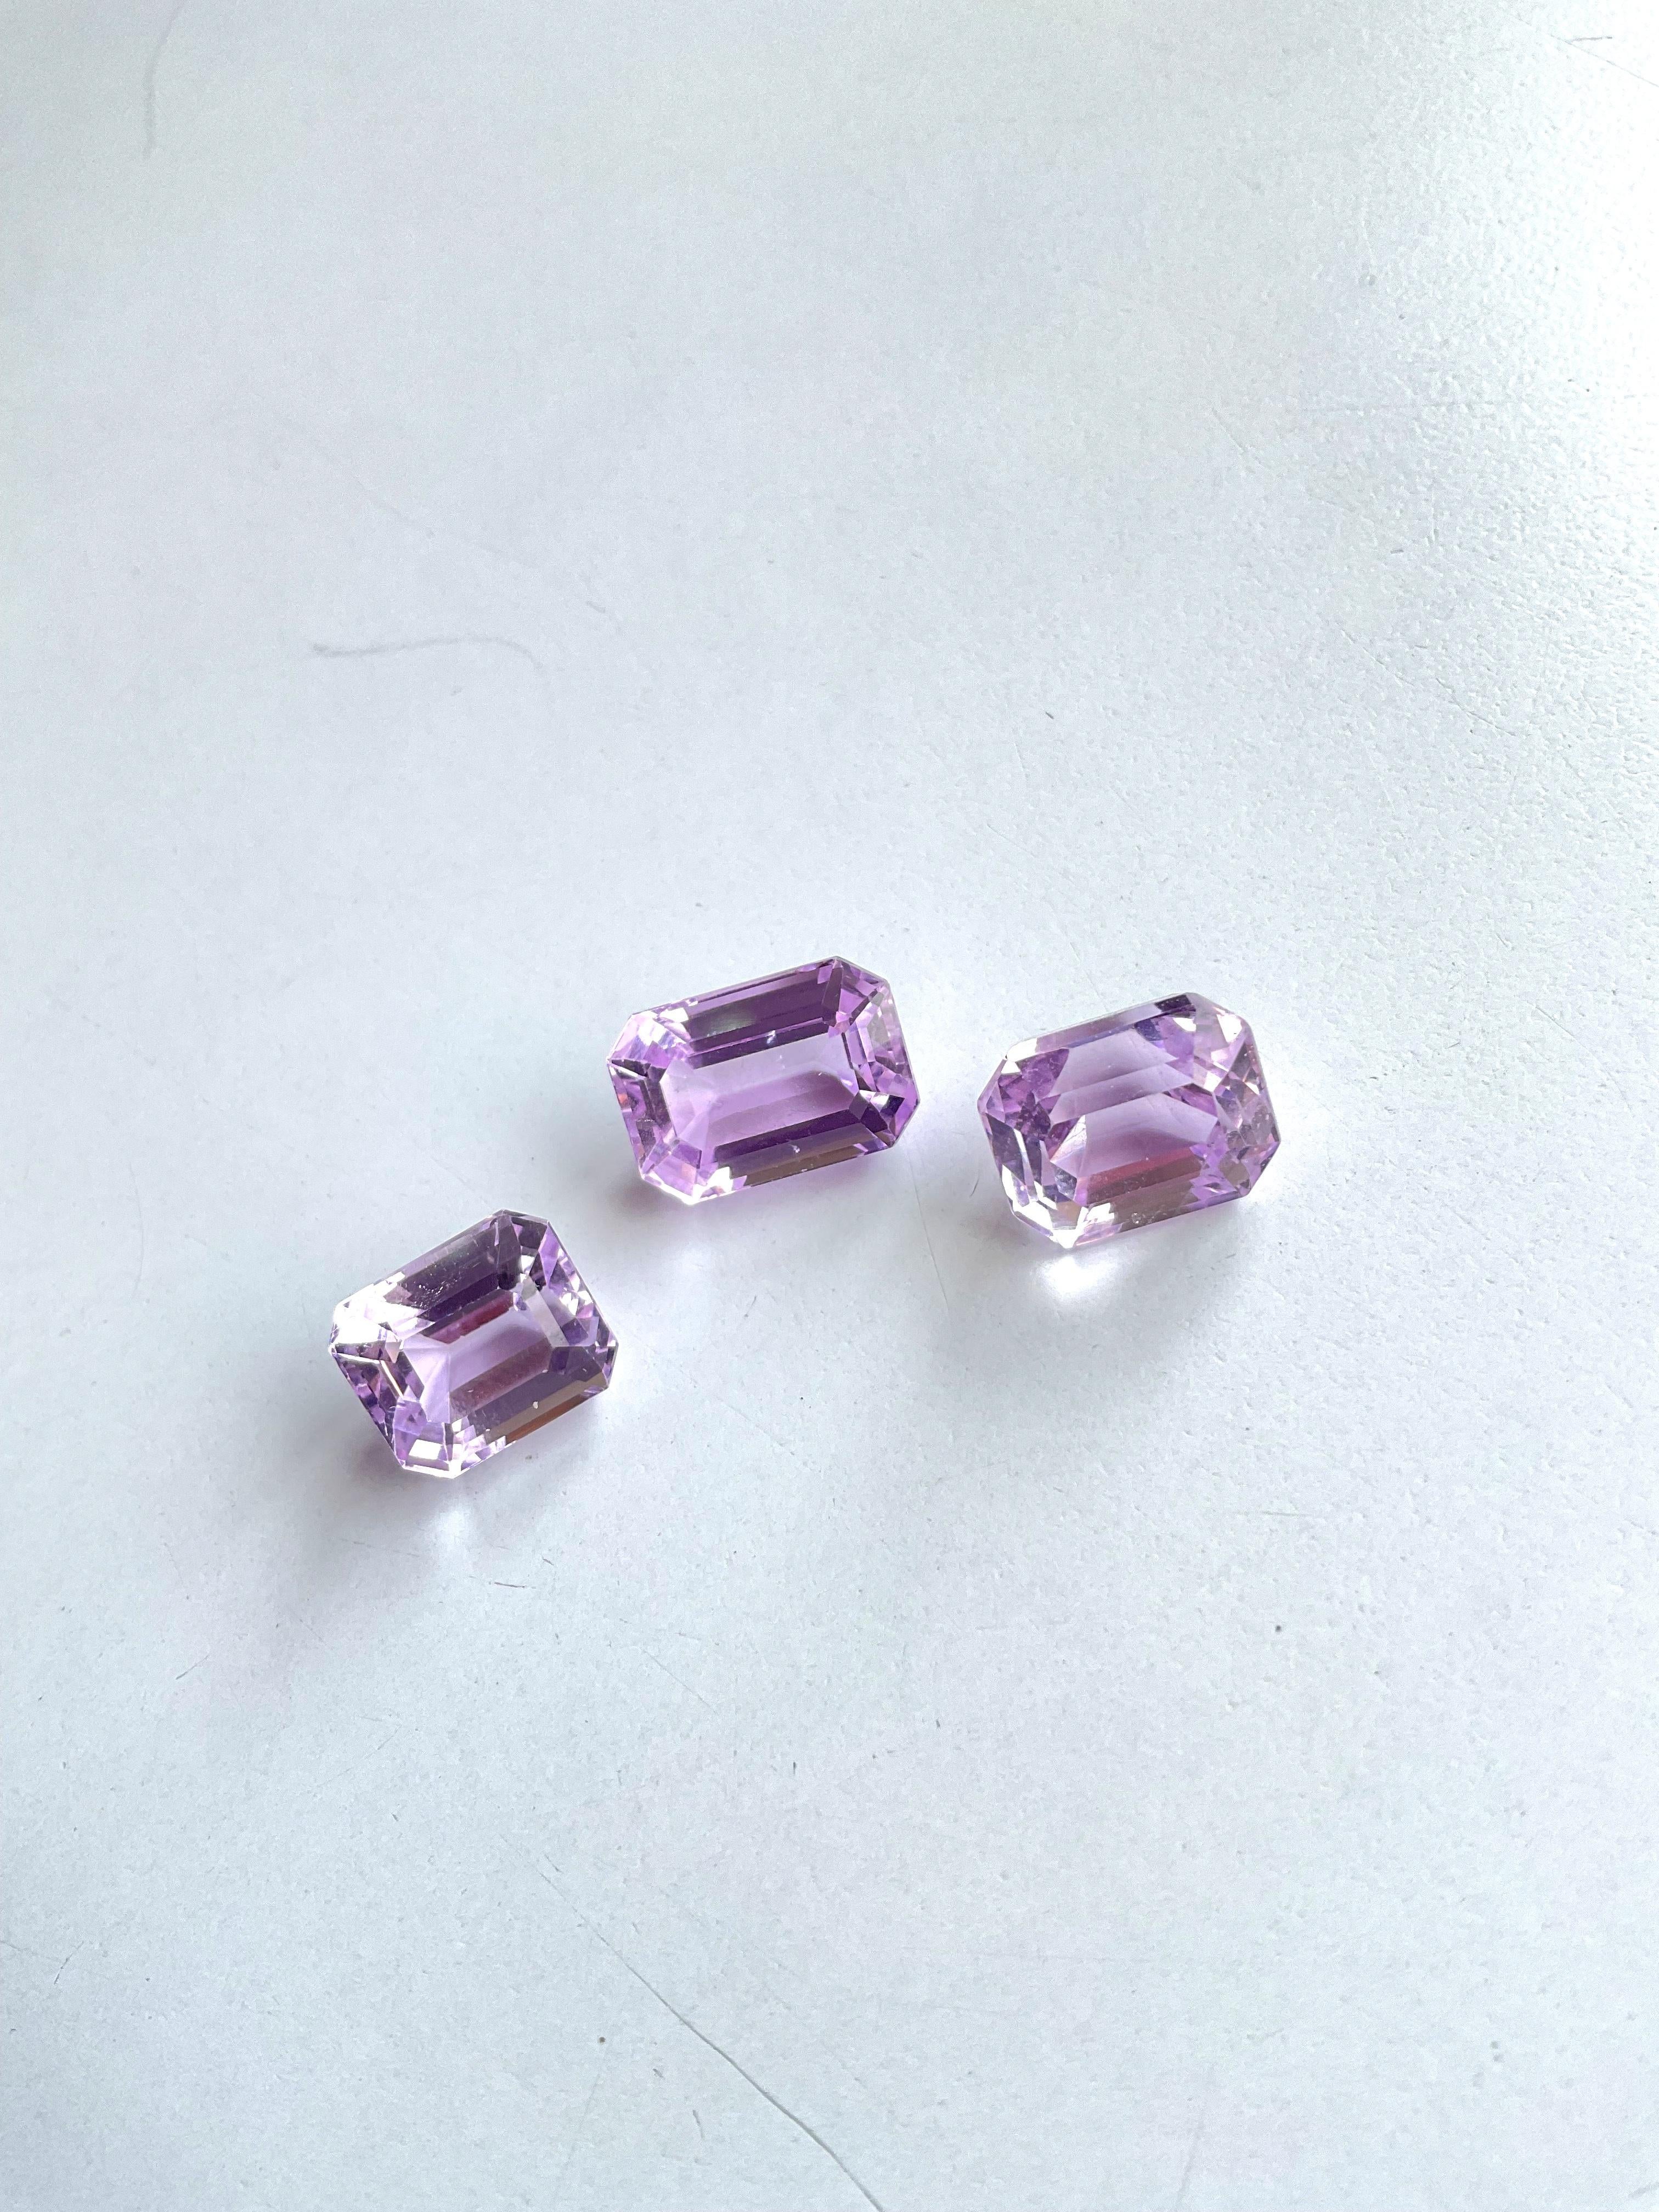 22.56 Carats Pink Kunzite Octagon Natural Cut Stones For Fine Gem Jewellery For Sale 1